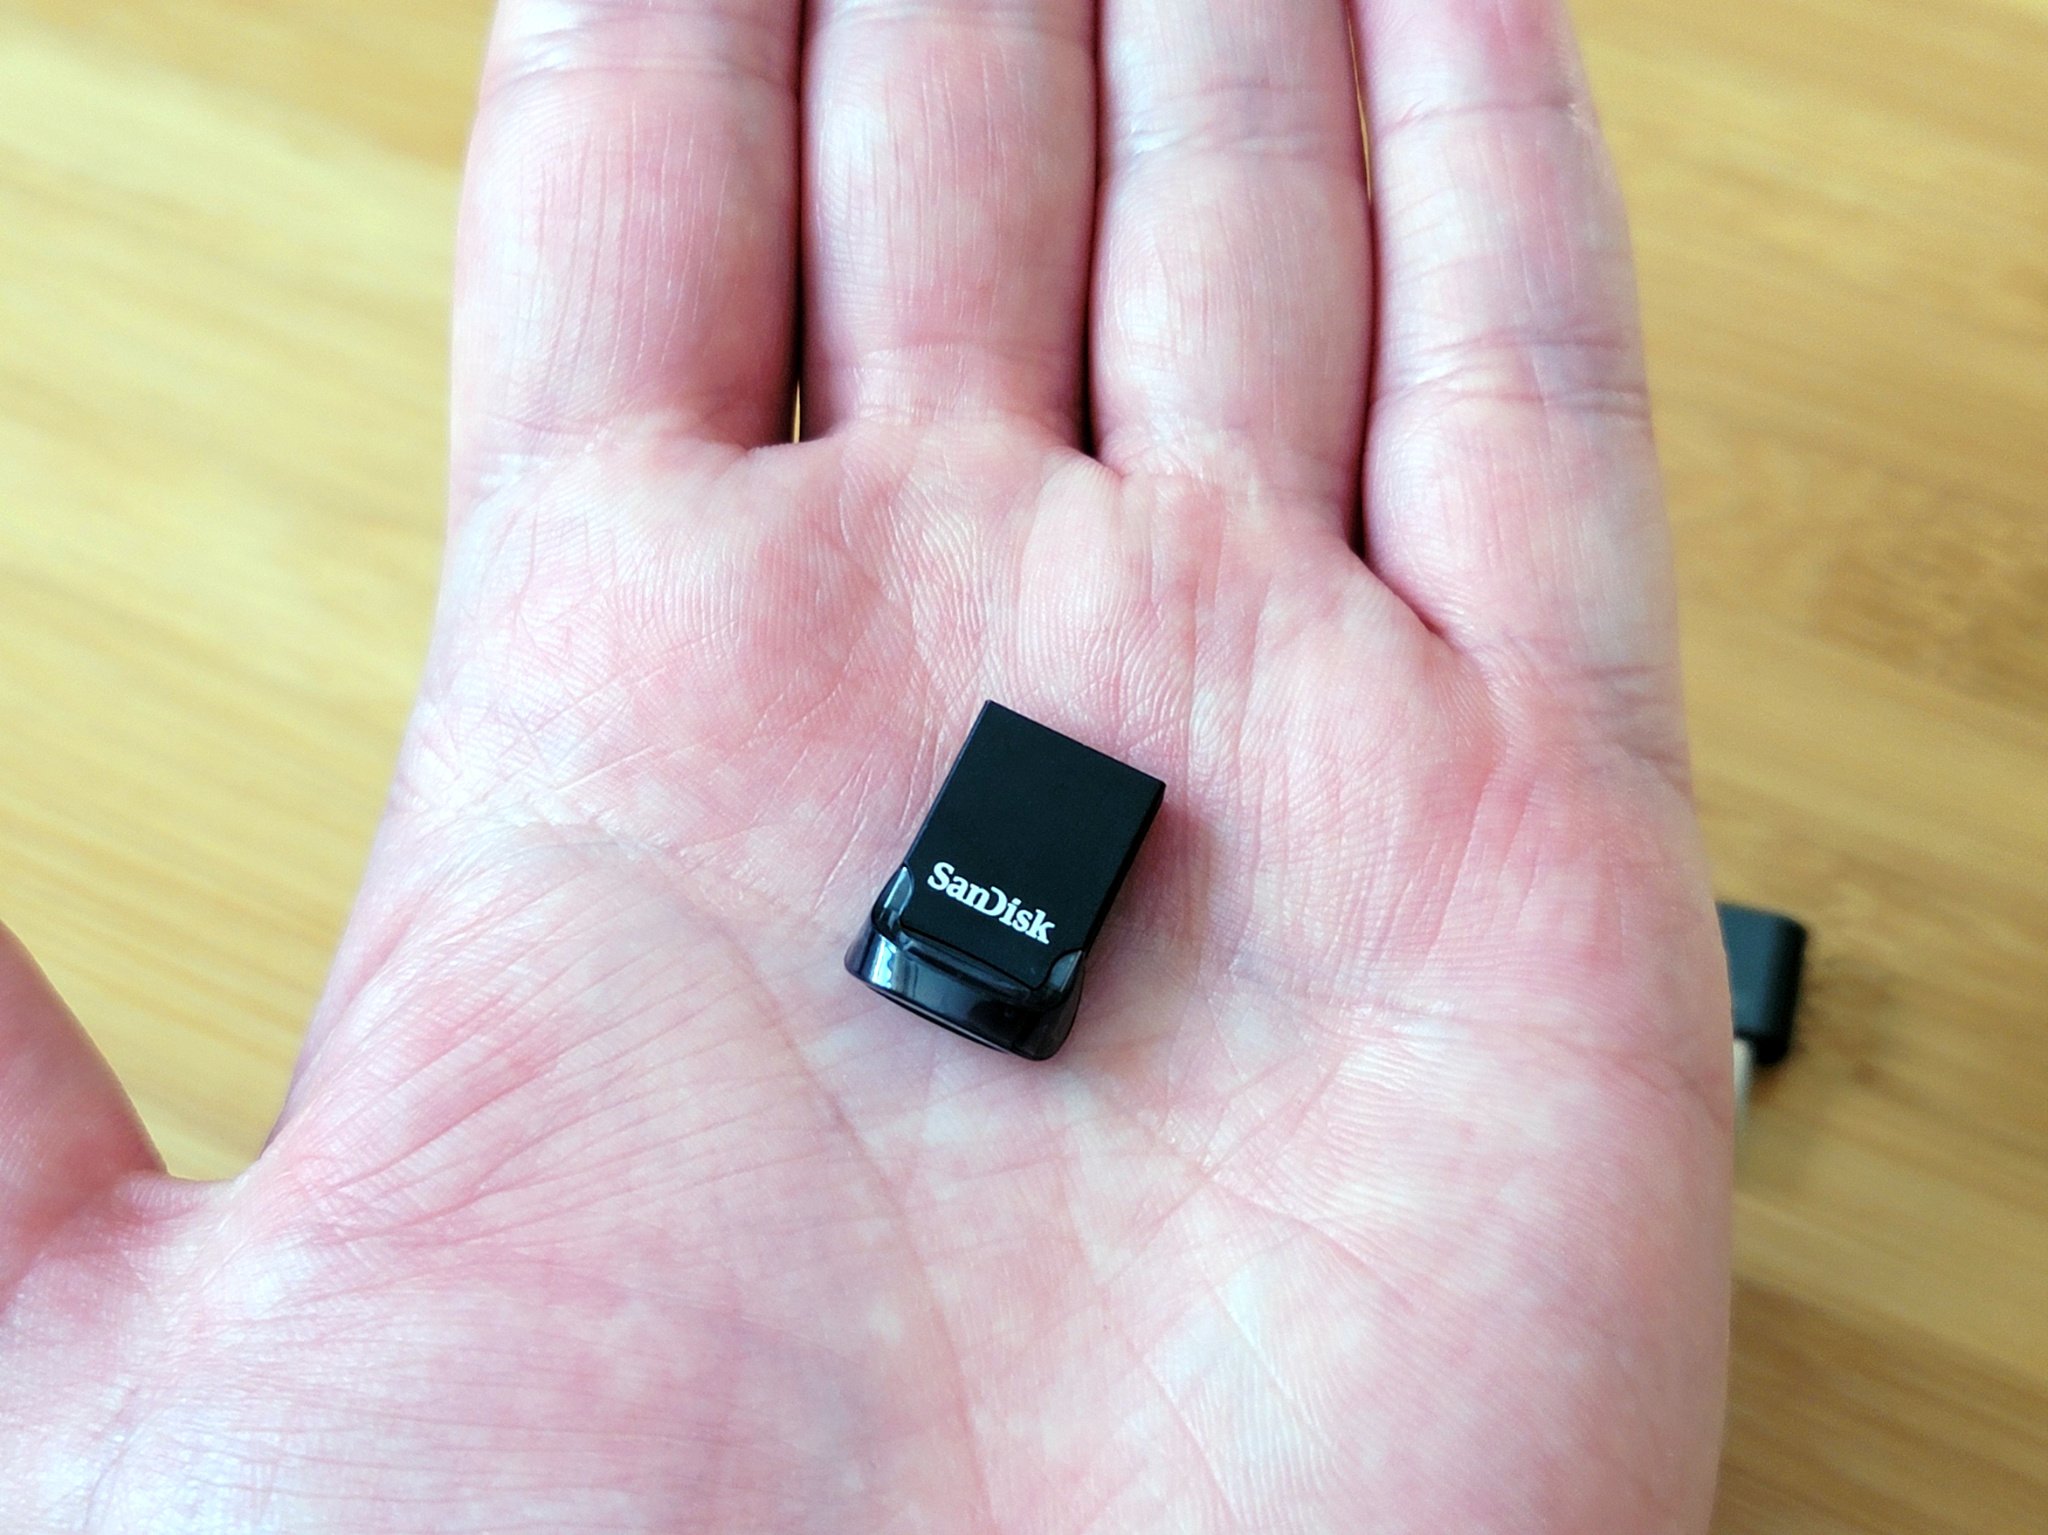 SanDisk Ultra Fit review: A slim, simple flash drive that blends right in